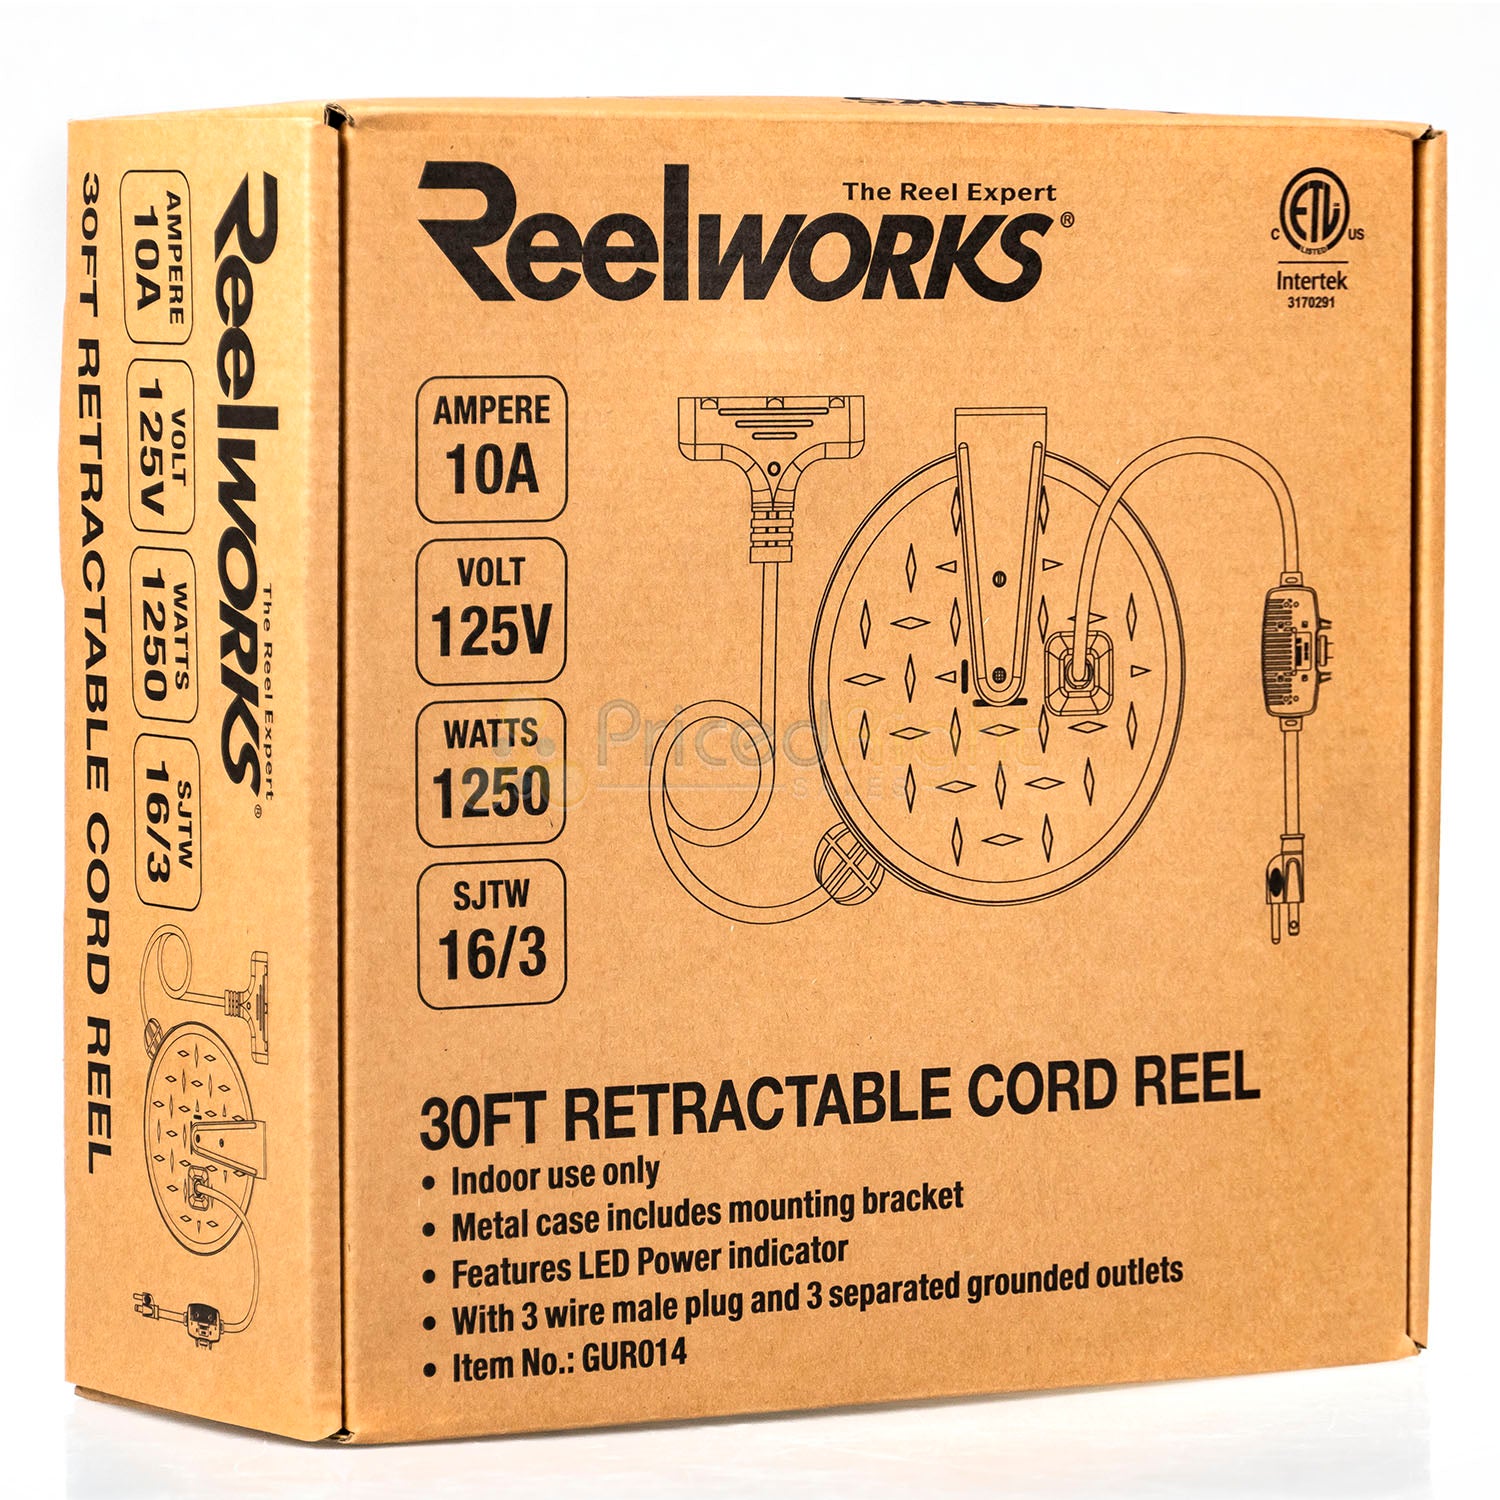 30 Ft Retractable Extension Cord Reel 3 Outlets 16/3 SJTW Cord Metal Reelworks